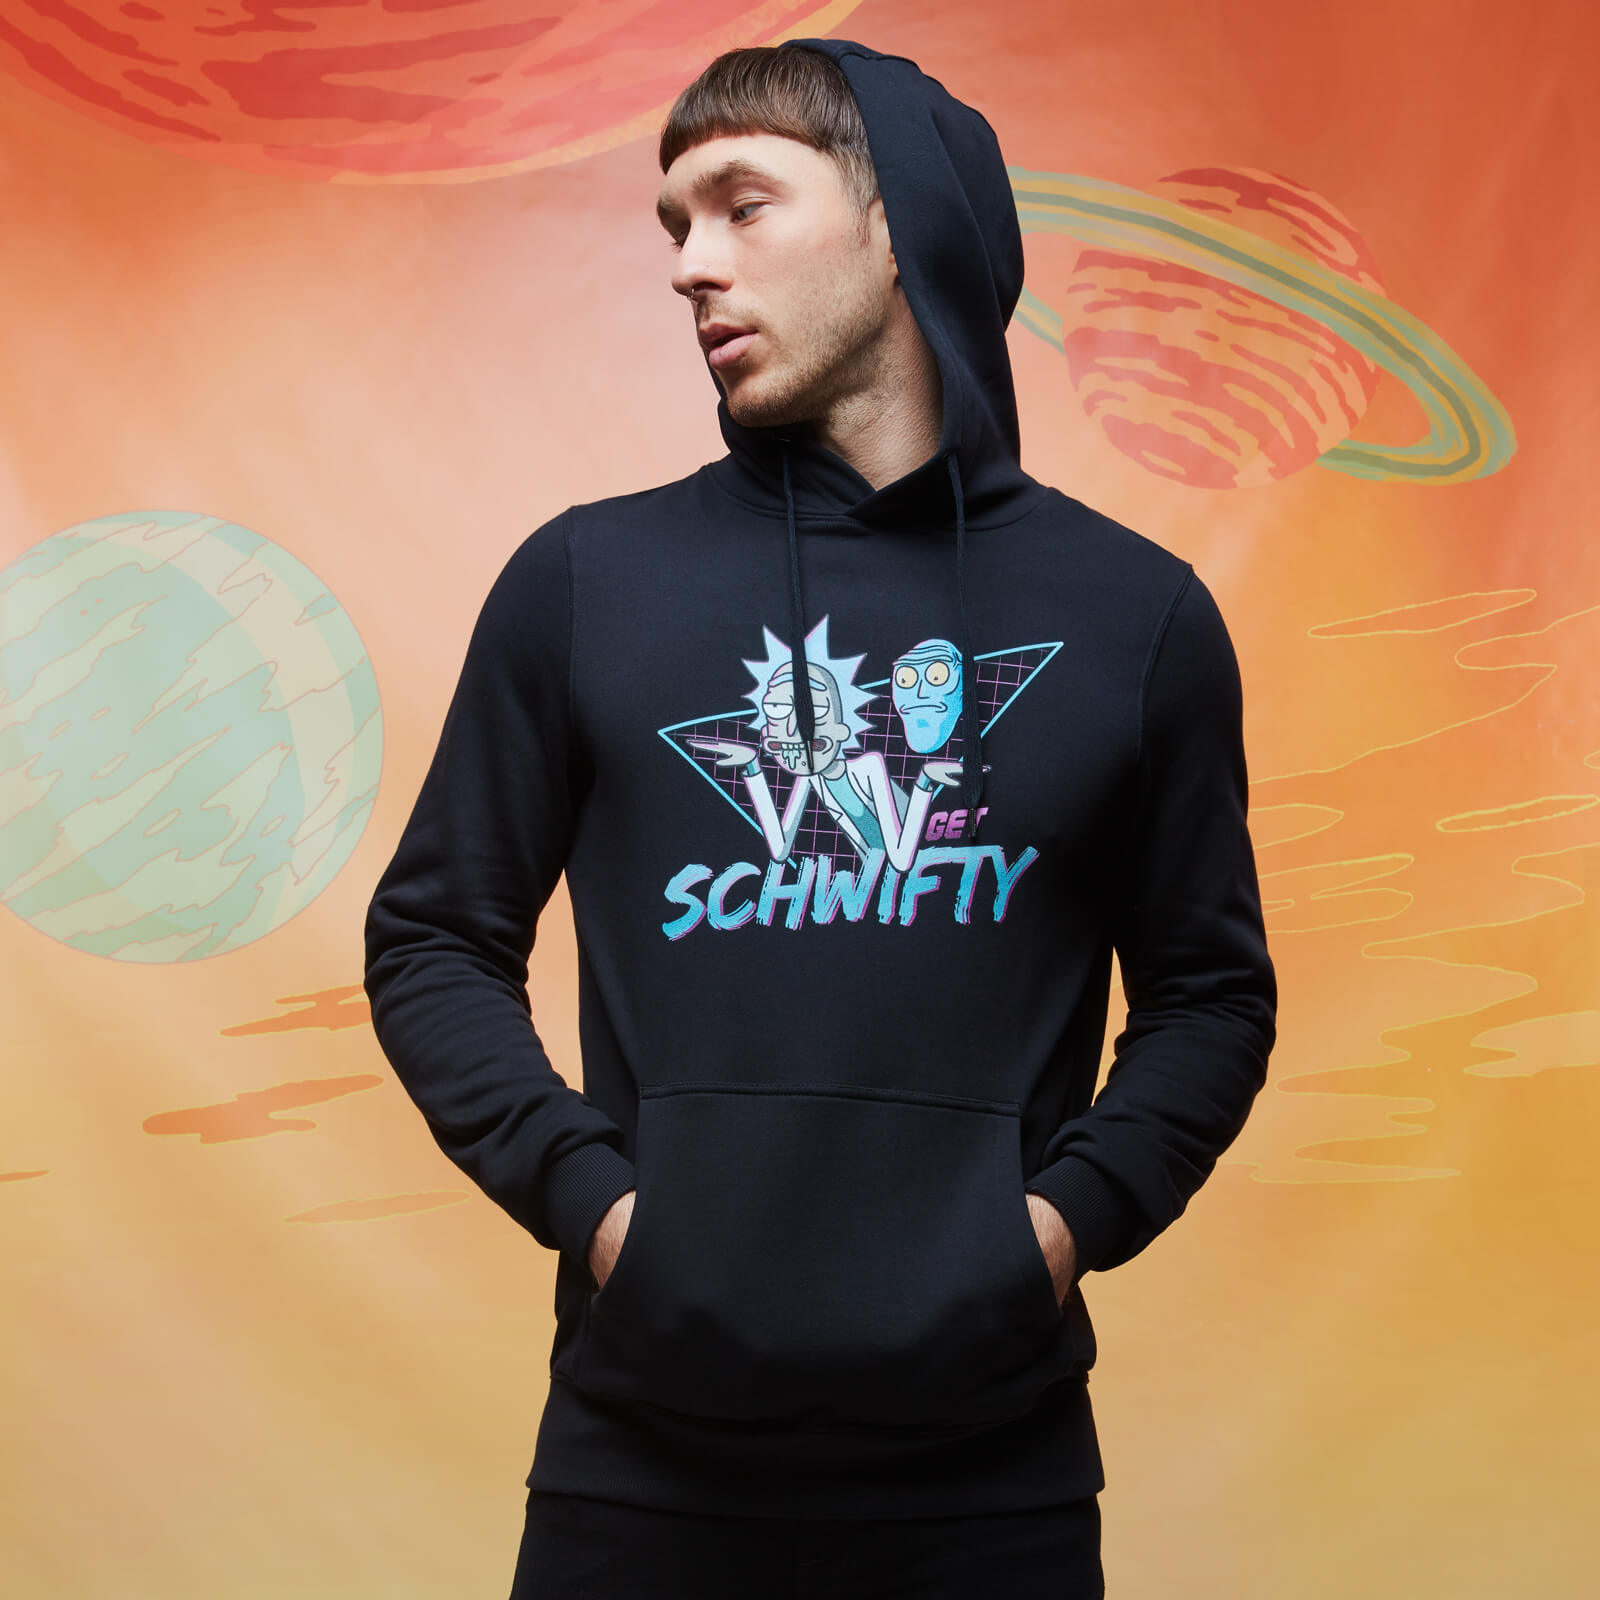 Rick and Morty Get Schwifty Hoodie - Black - XL